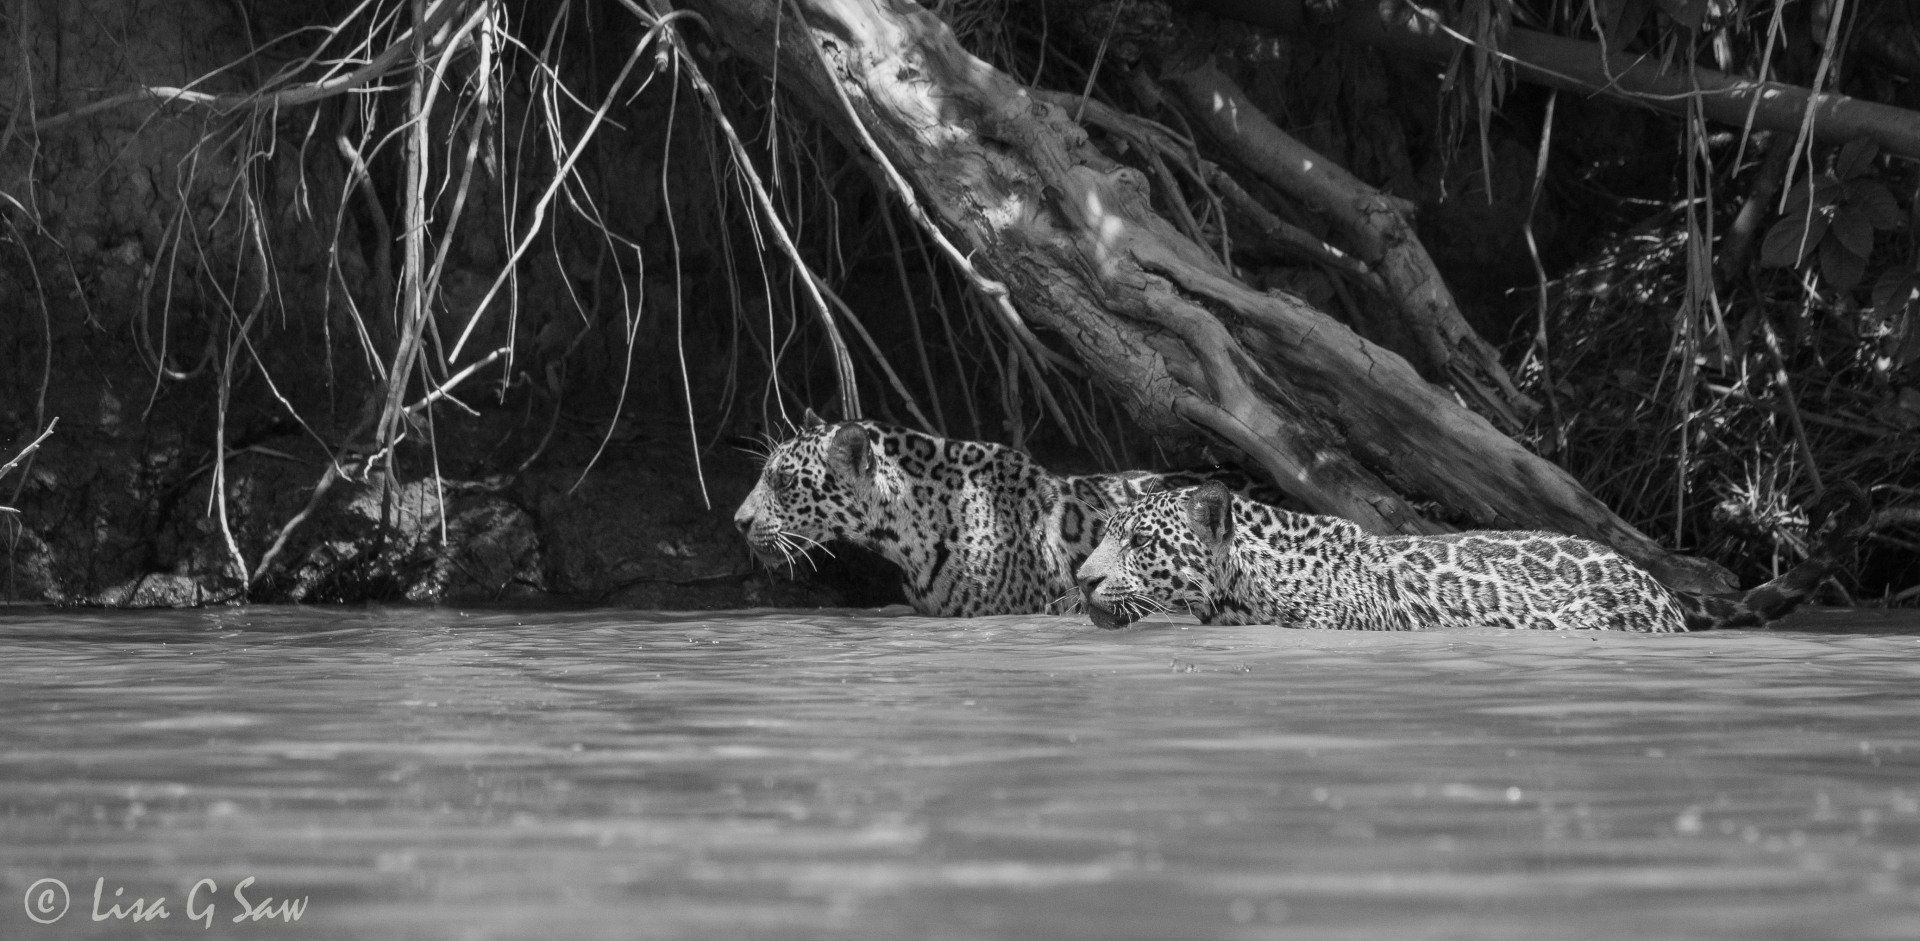 Two Jaguars walking together through water (black and white)